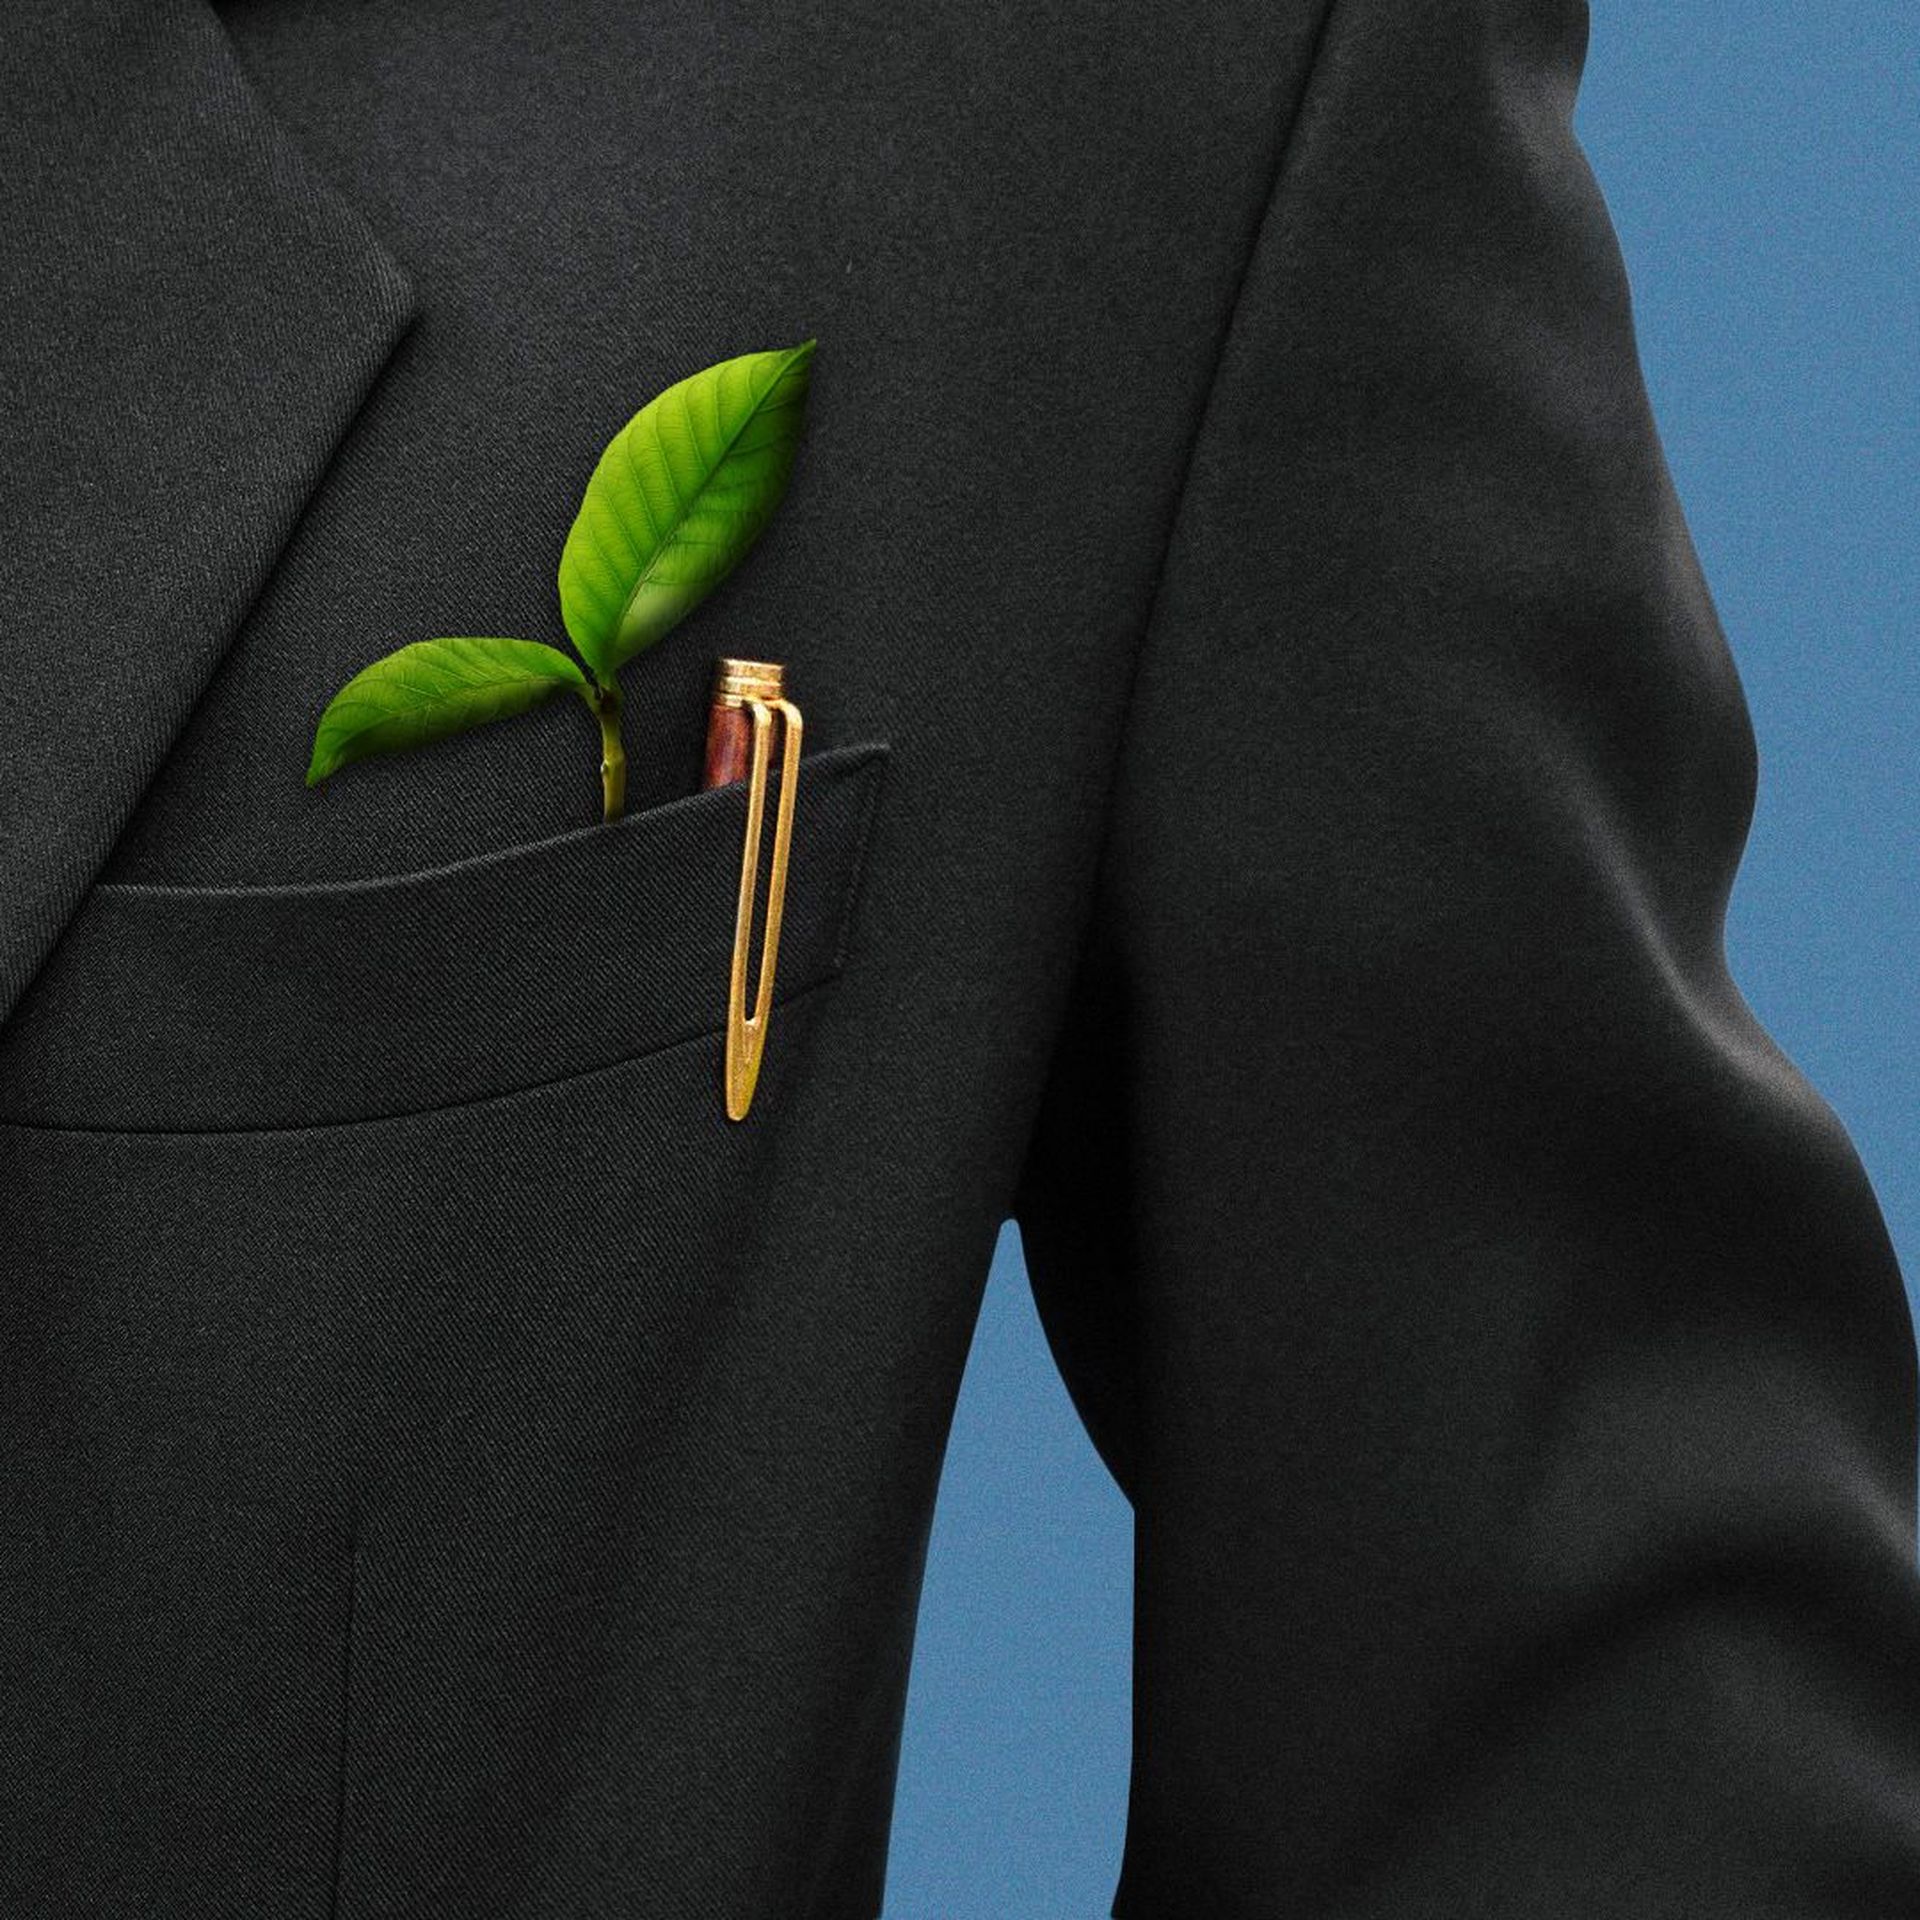 Illustration a small sprout and a pen in the lapel pocket of a suit jacket.